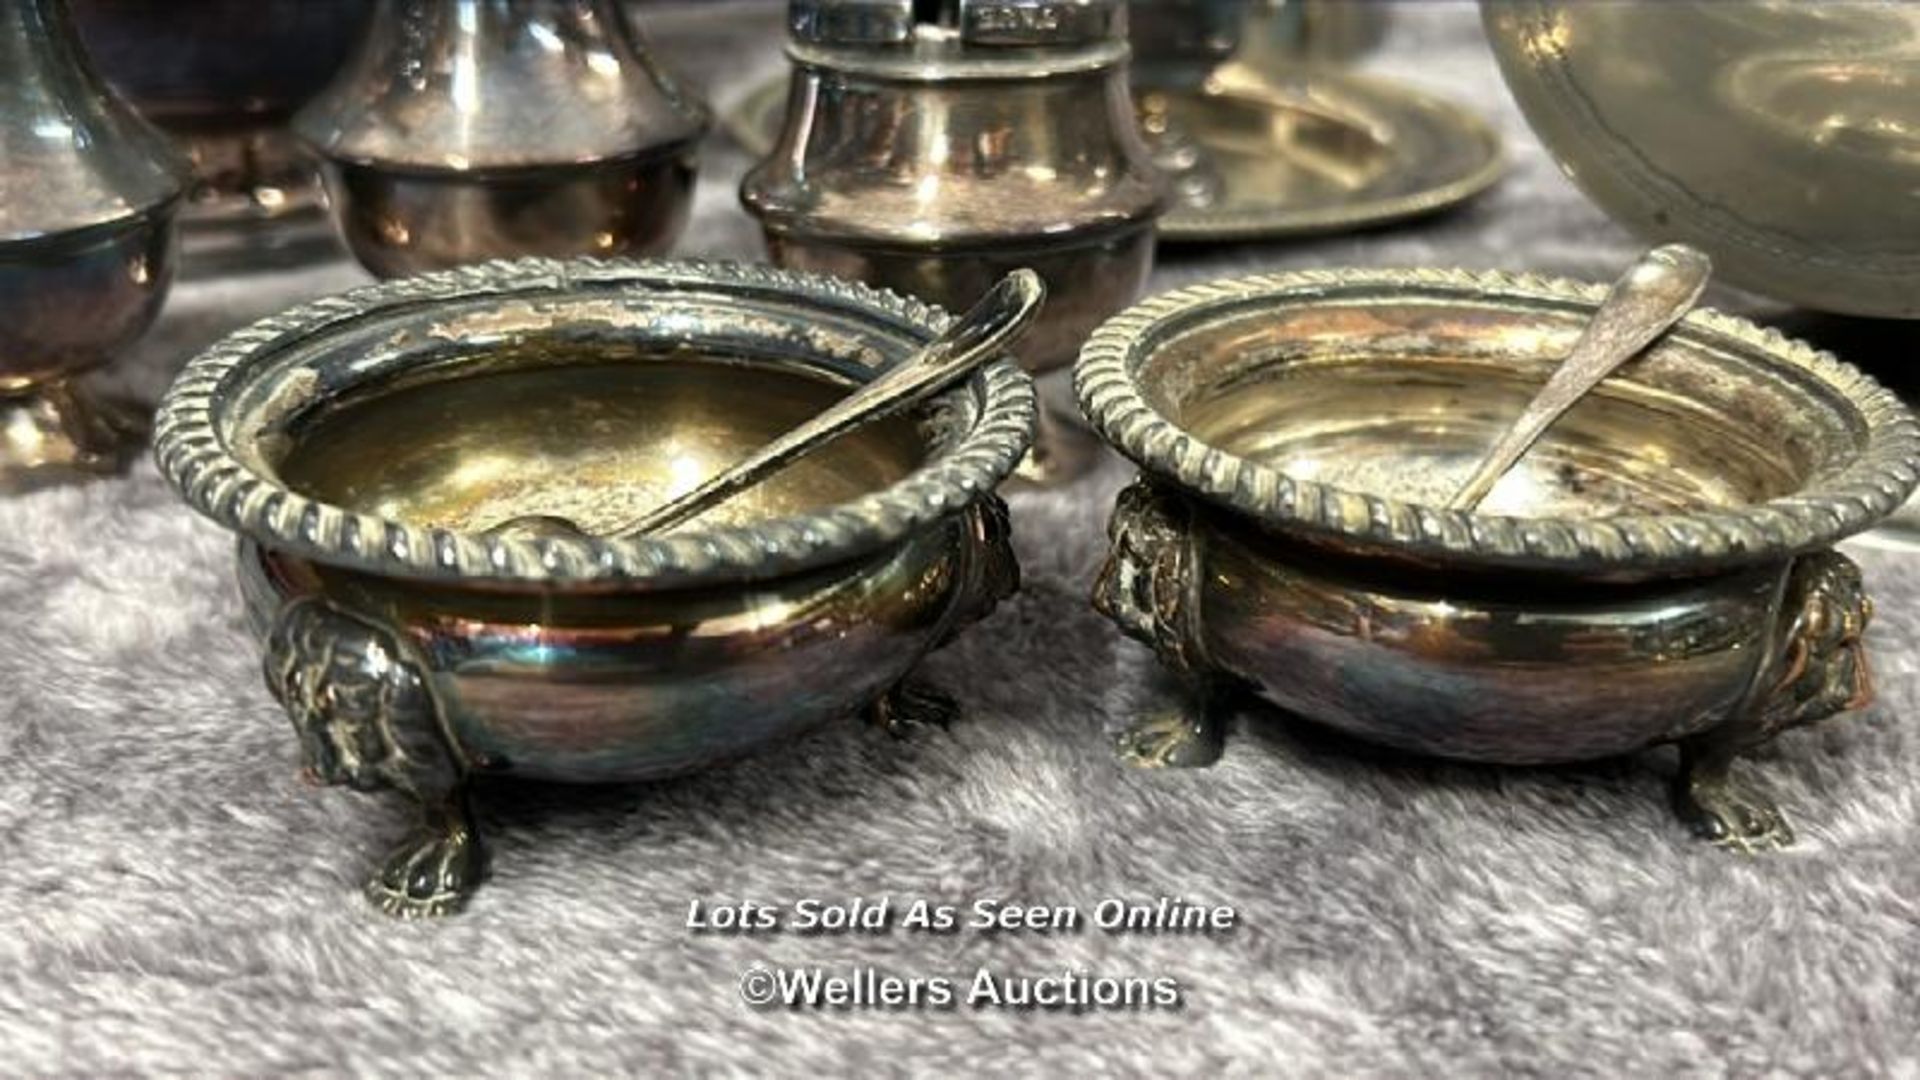 A large collection of antique metal plated items including a three armed candelabra, goblets, - Image 7 of 17